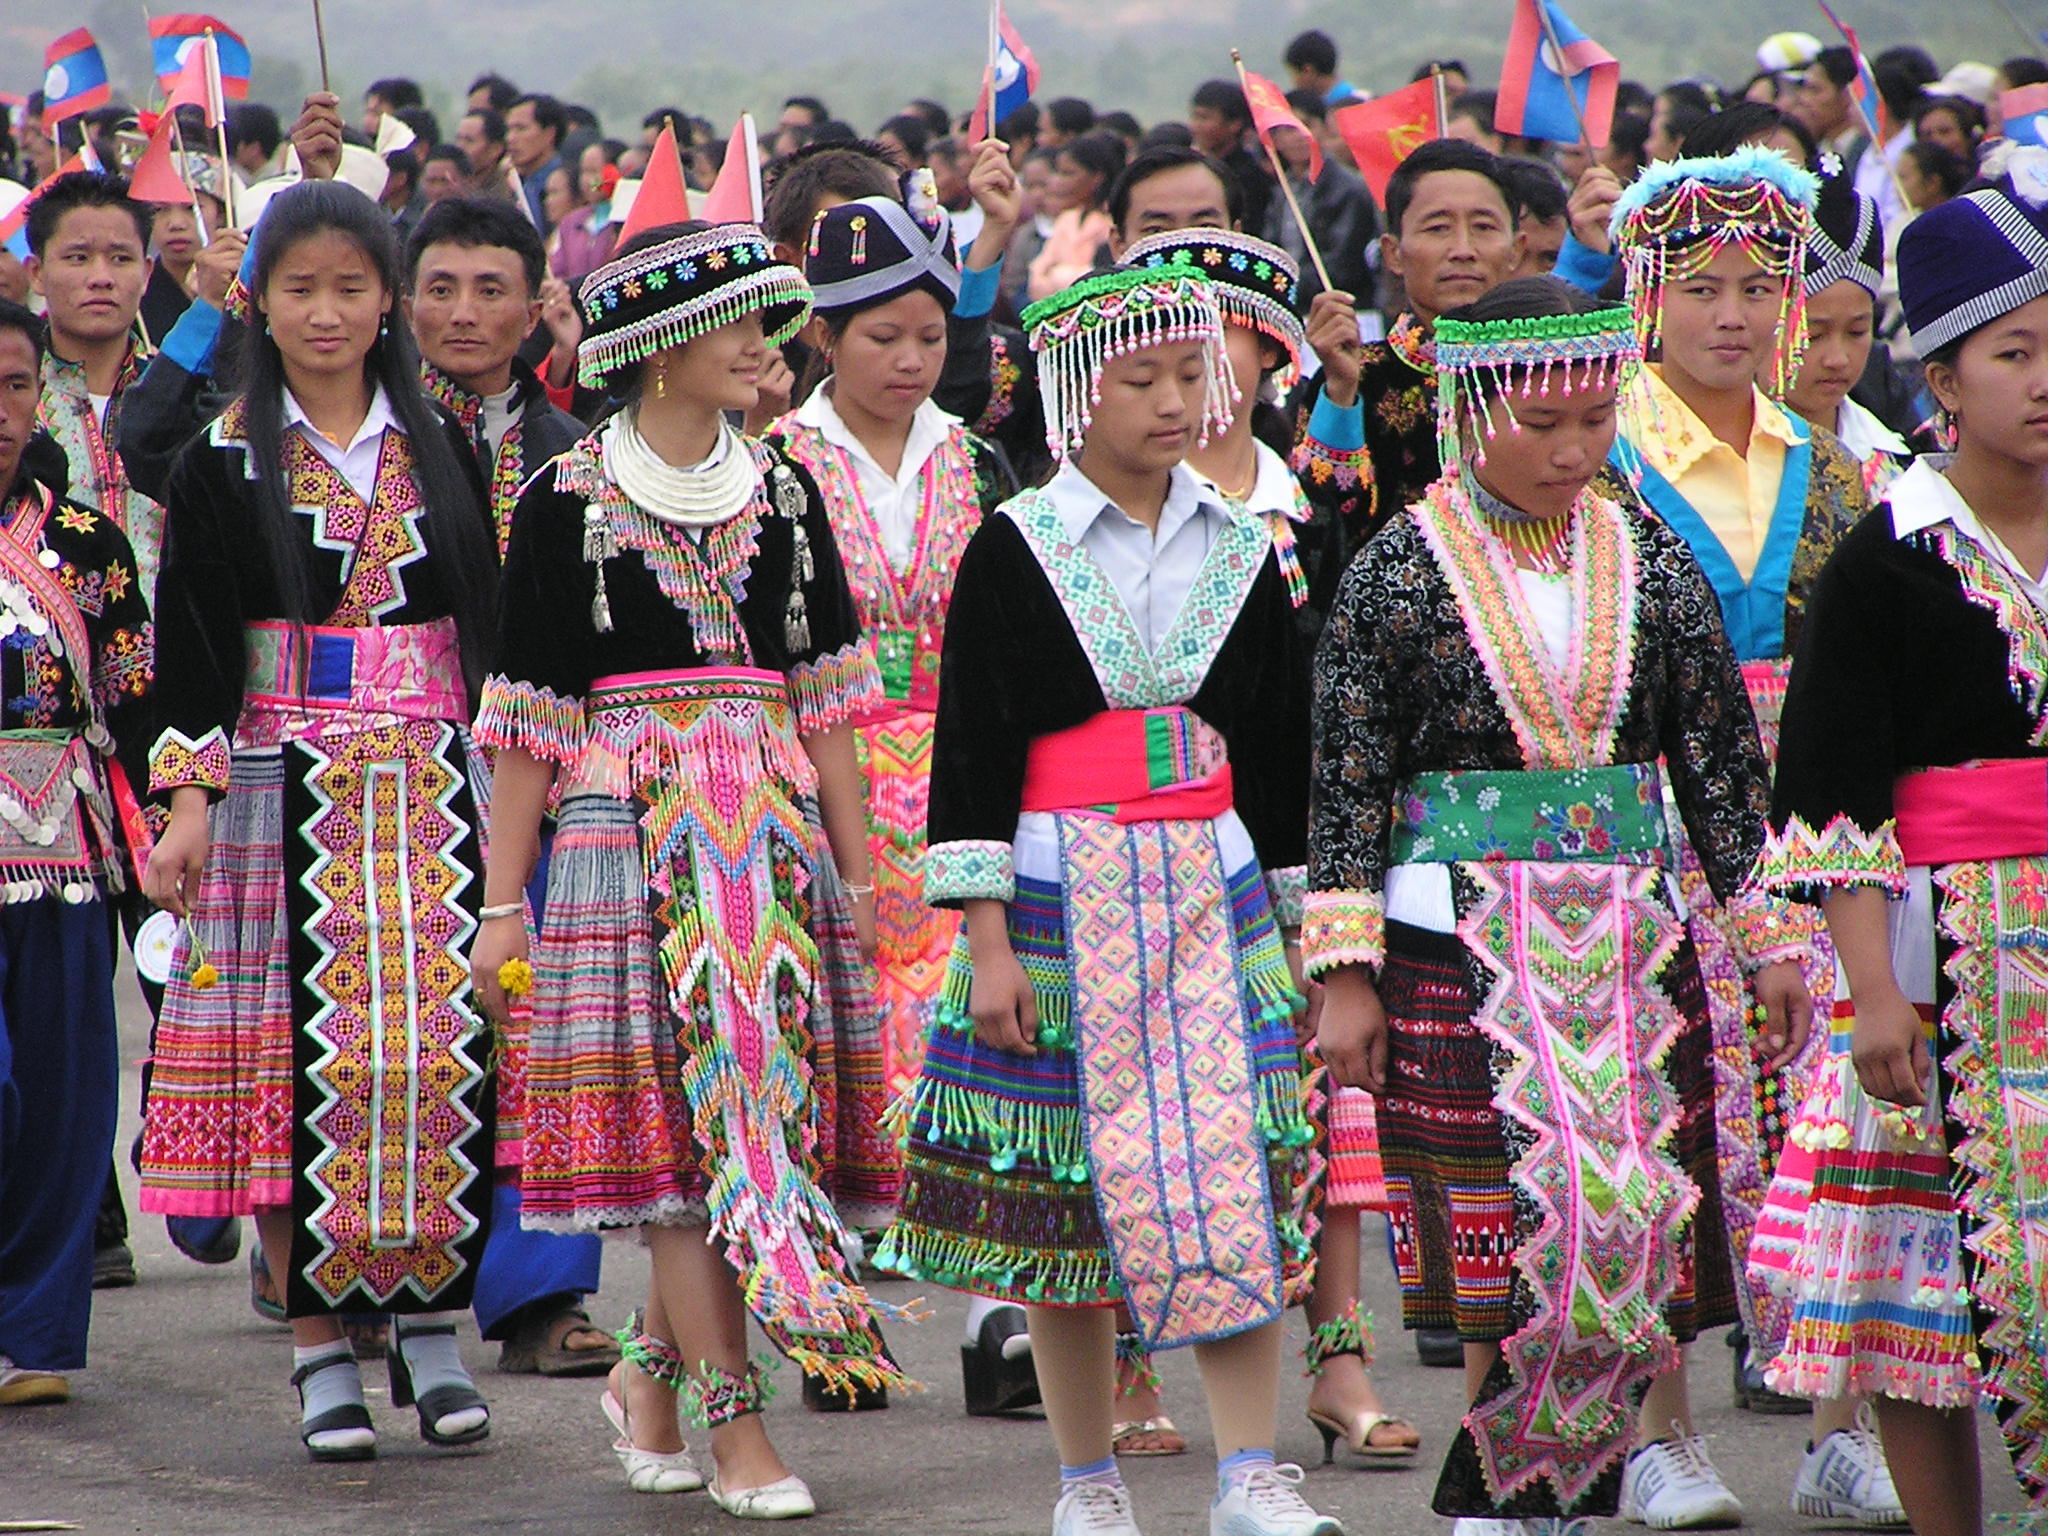 Hmong Still Struggle for Acceptance in Wisconsin Communities | WUWM